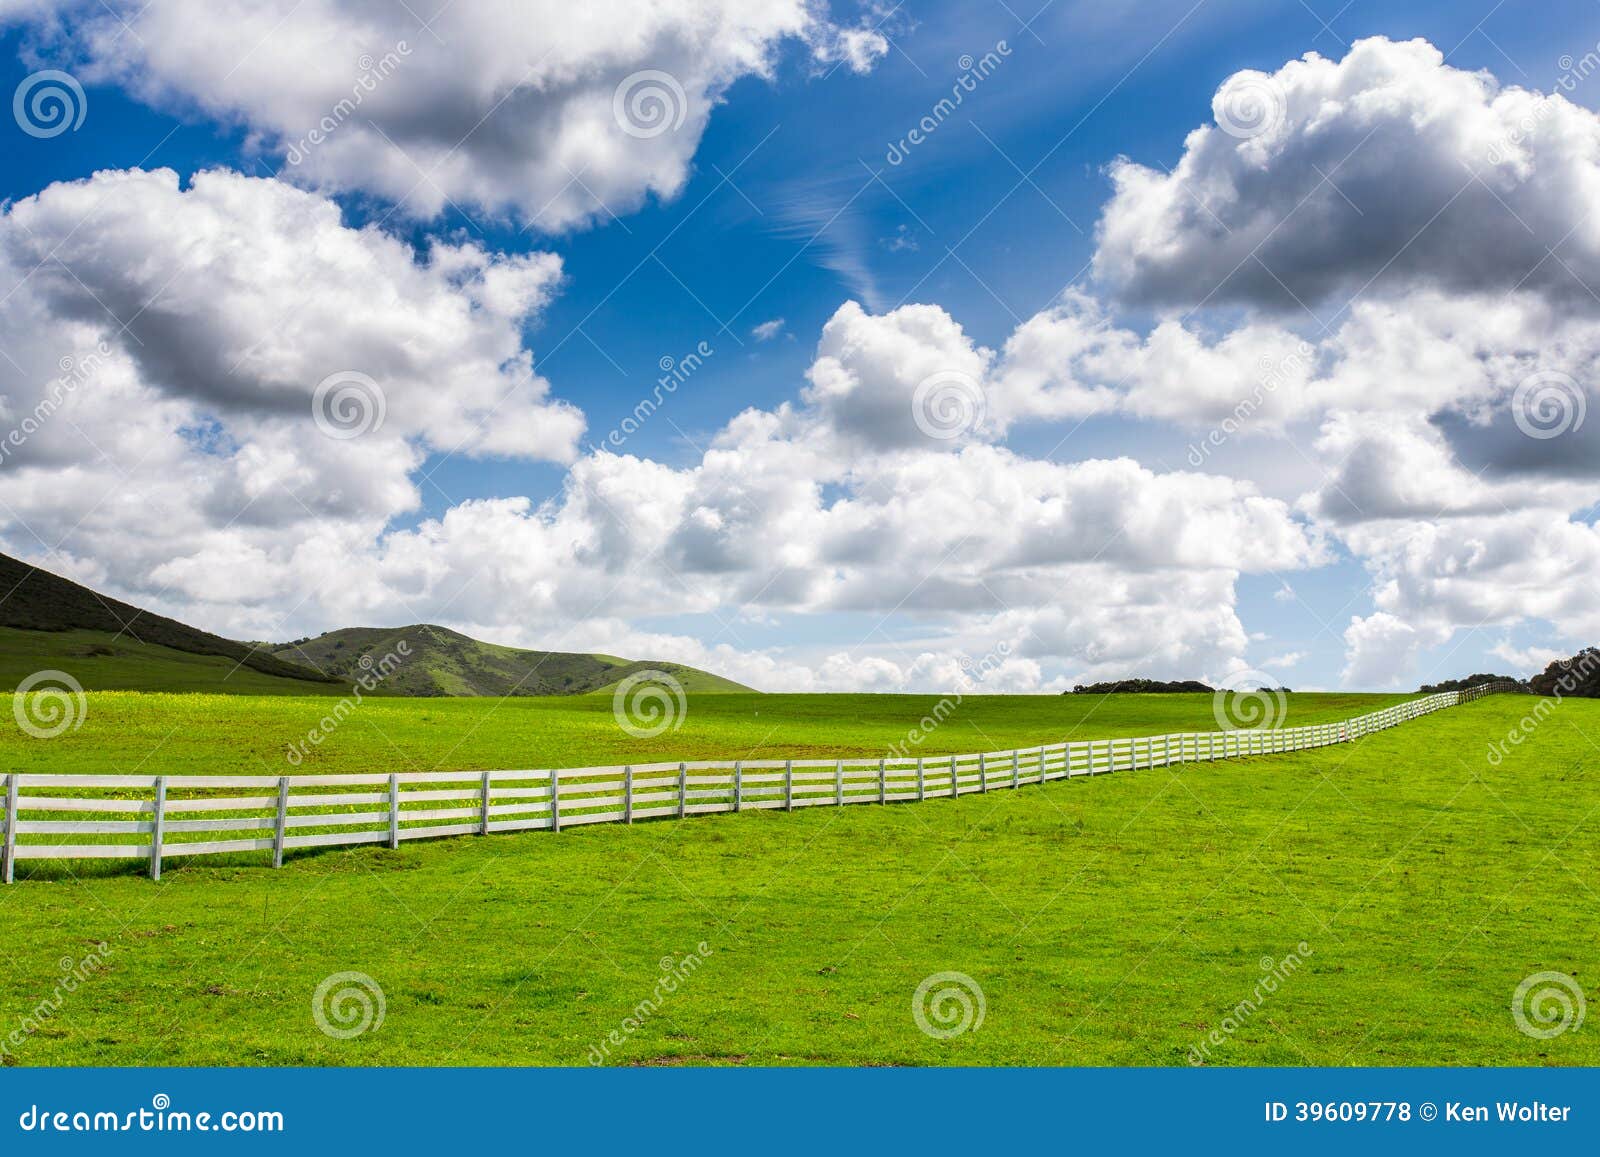 green pasture with white fence